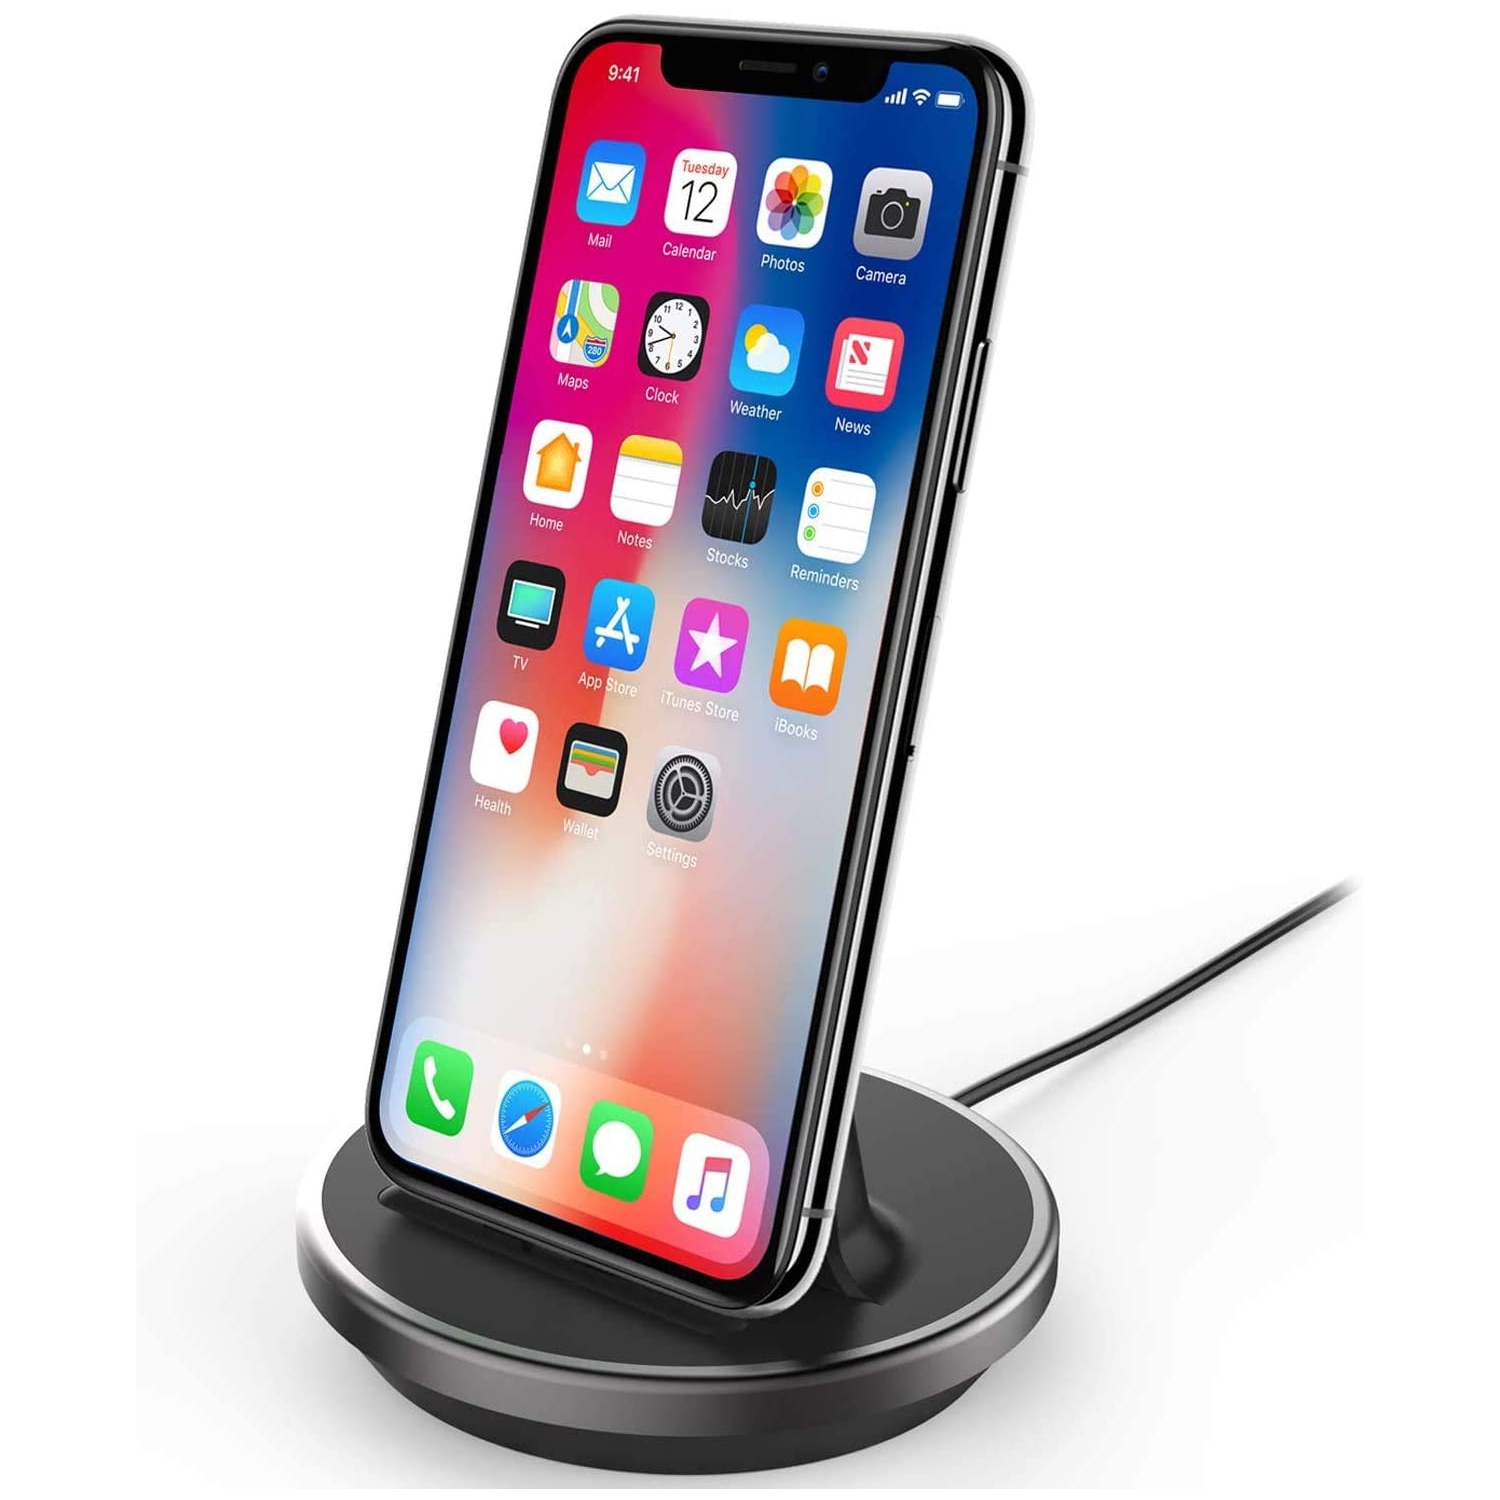 Wireless Charger Stand, Universal Qi-Certified 10W/7.5W Fast Wireless Charging Compatible with iPhone 12 Mini/12 Pro Max/11/XR/XS/X/8 Plus, Samsung Galaxy Note 20 Ultra/10+/S20/S